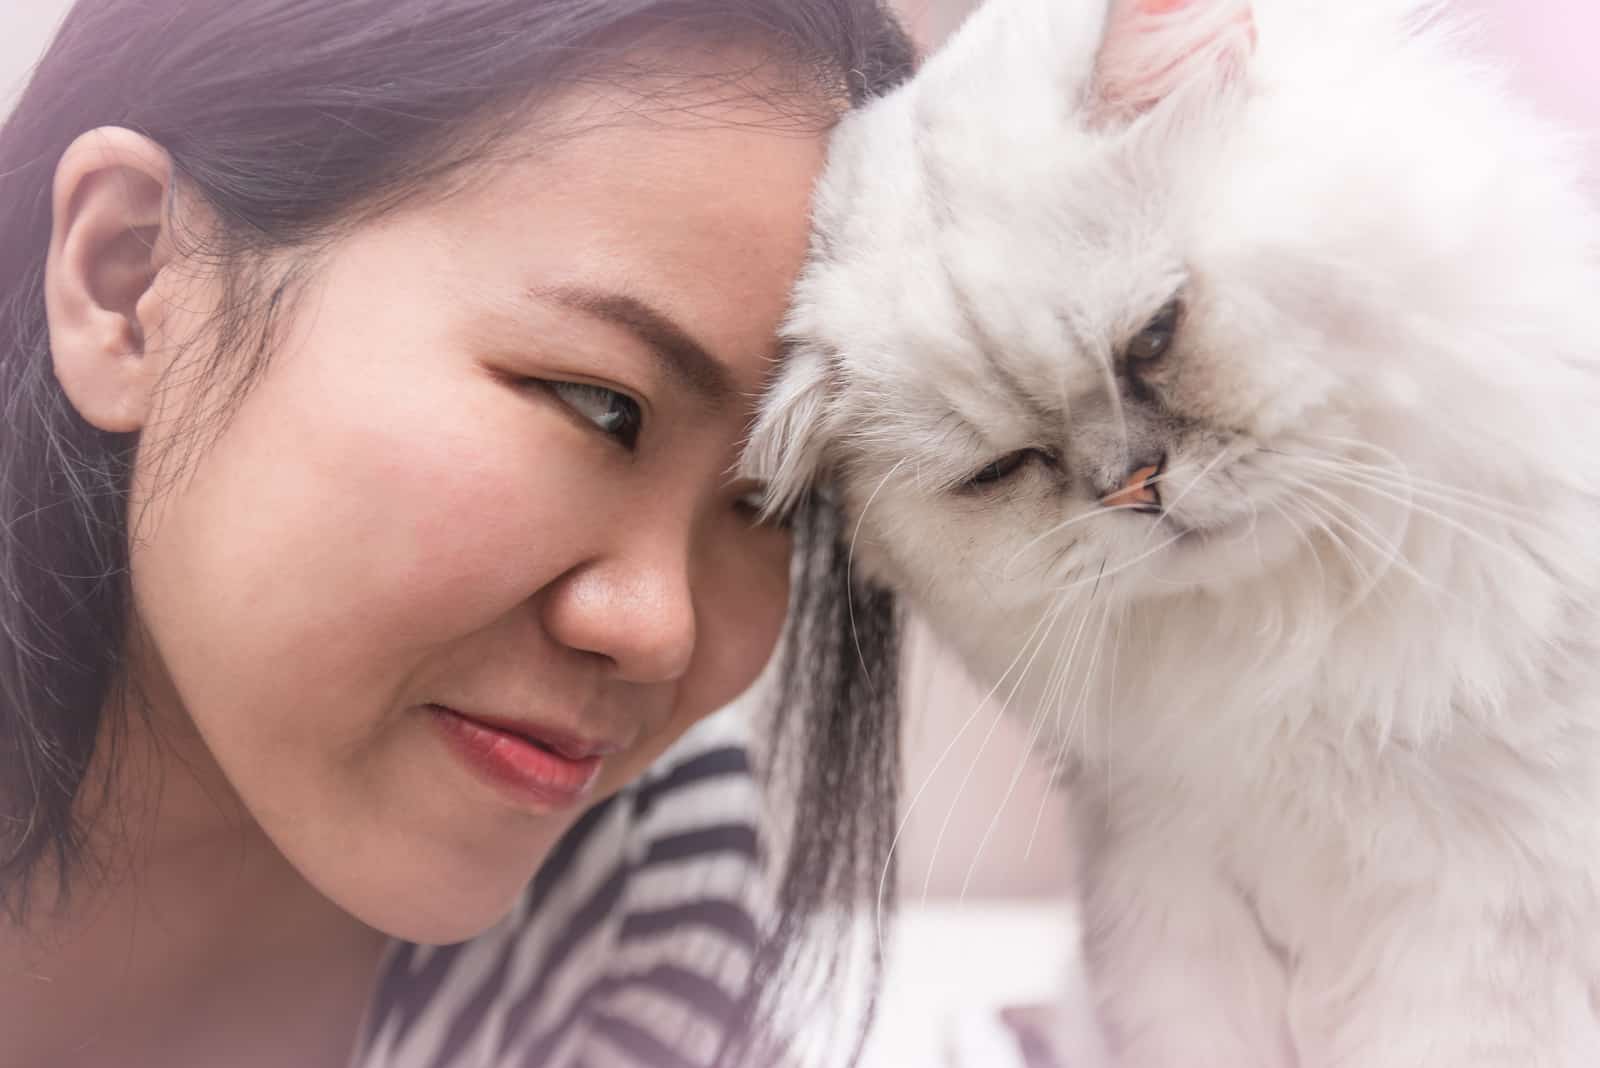 7 Reasons Why Does My Cat Headbutt Me Then Bite Me